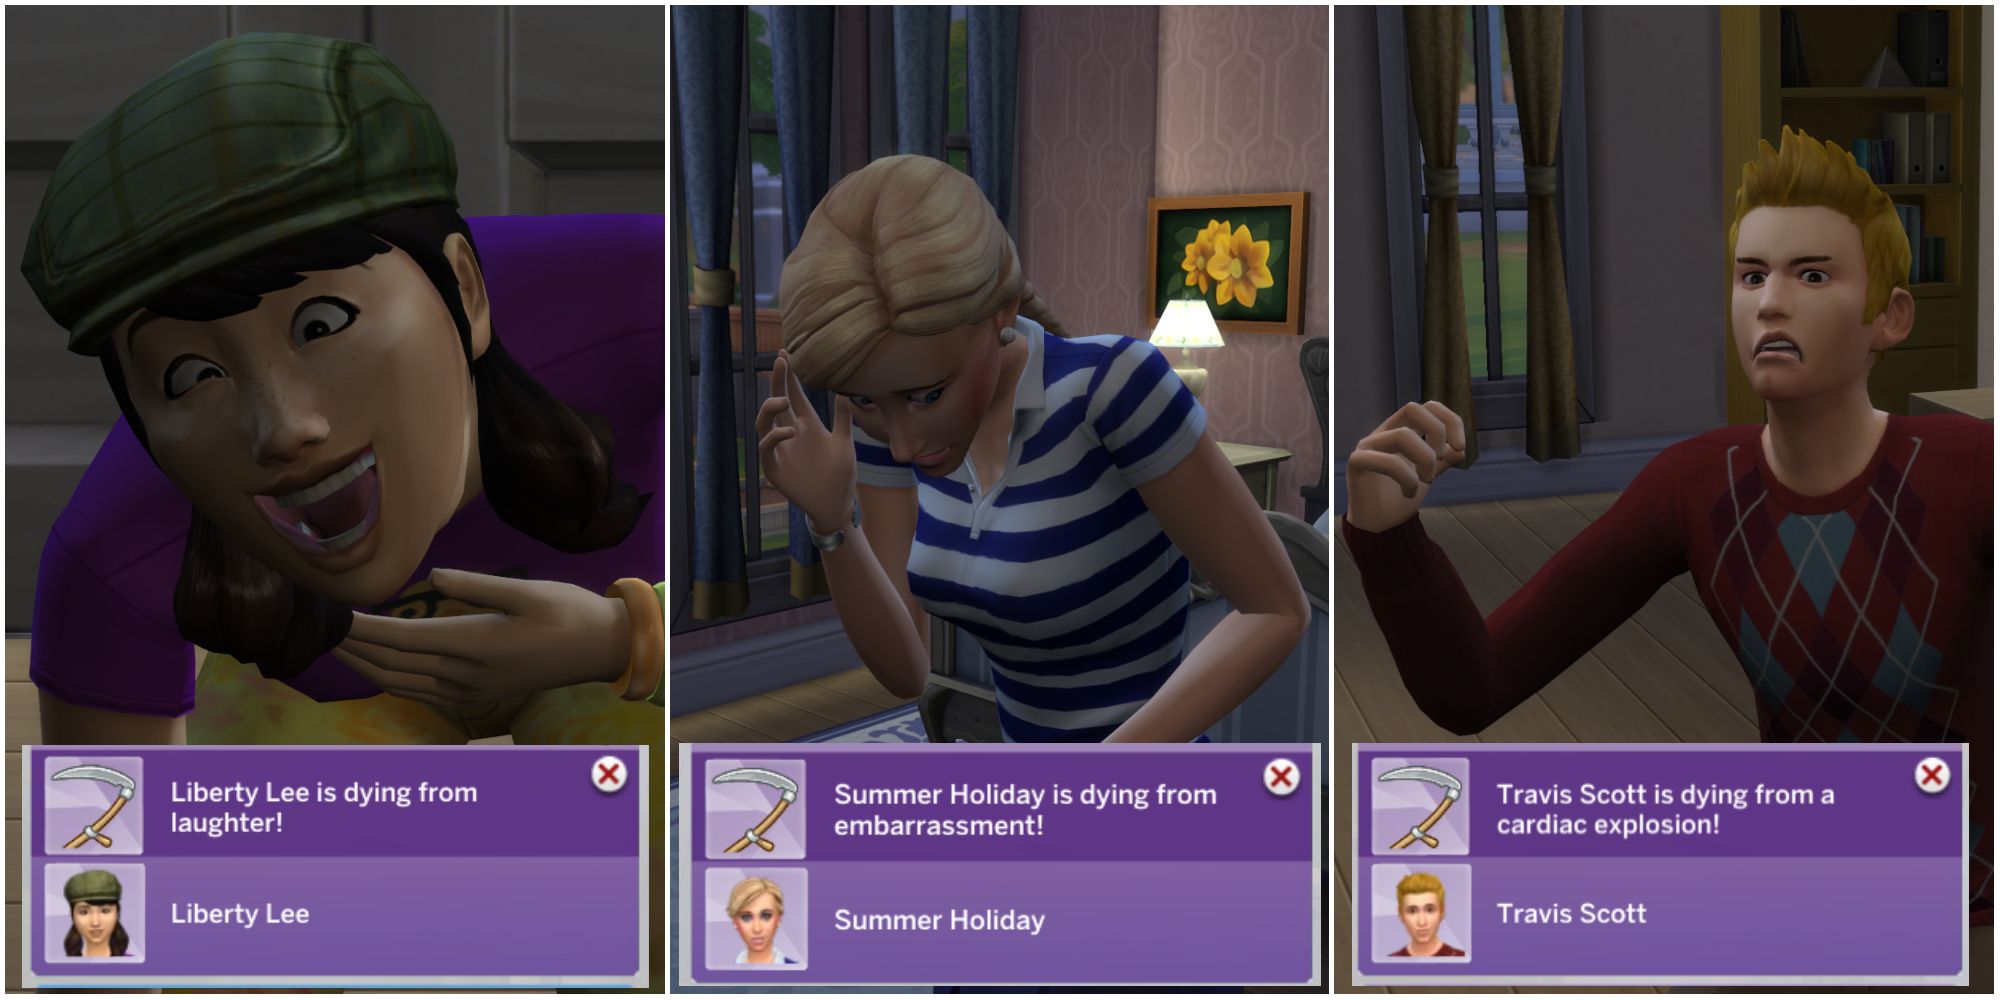 Three Sims dying of the different emotional deaths in the game: death from laughter, death from embarrassment, and death from cardiac explosion